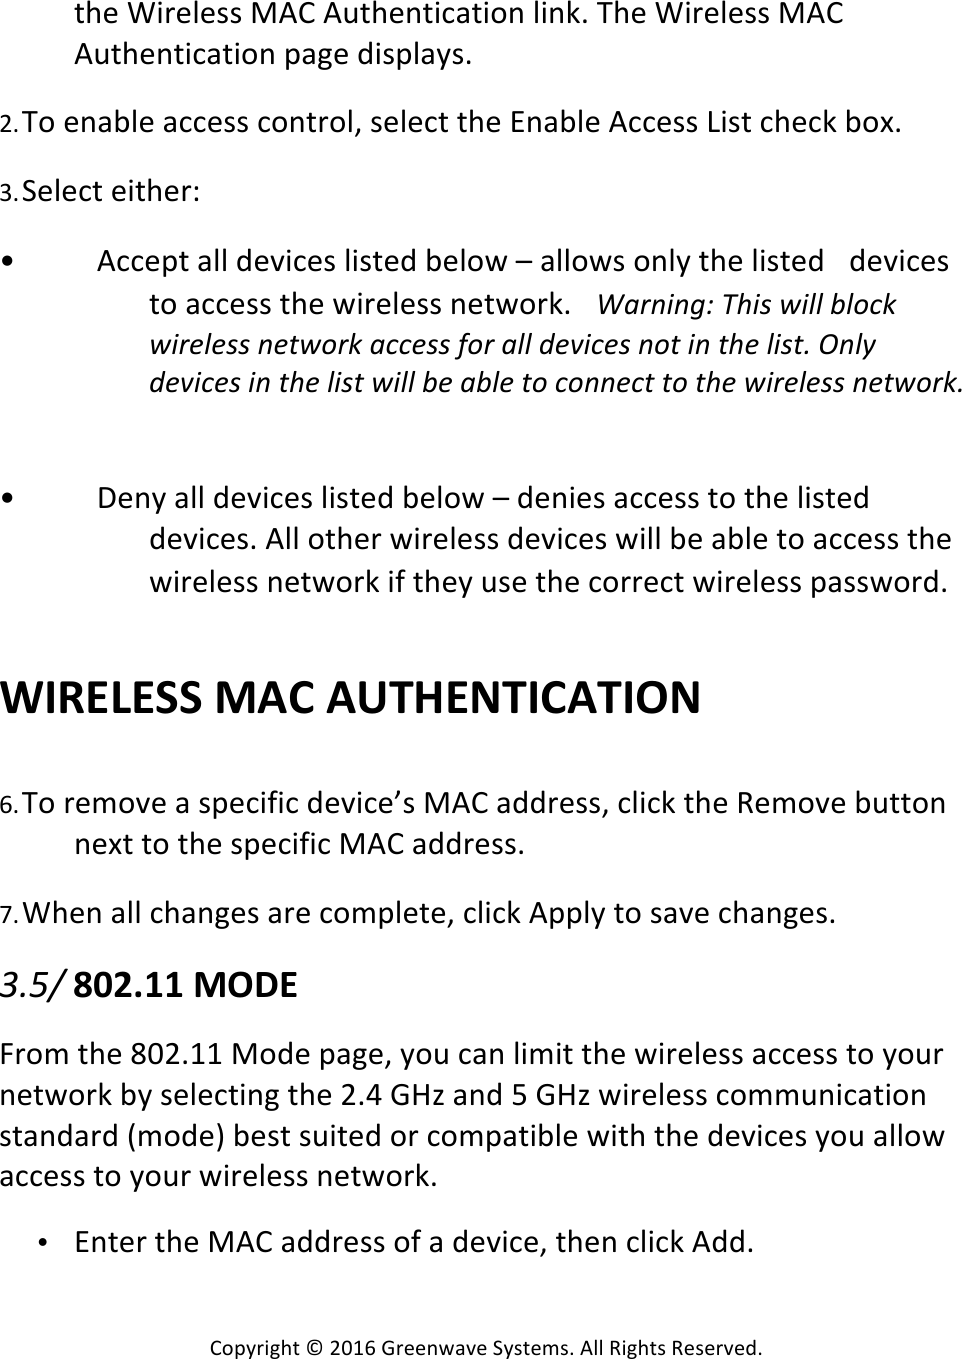 Copyright*©*2016*Greenwave*Systems.*All*Rights*Reserved.**the*Wireless*MAC*Authentication*link.*The*Wireless*MAC*Authentication*page*displays.* *2. To*enable*access*control,*select*the*Enable*Access*List*check*box.* *3. Select*either:**• Accept*all*devices*listed*below*–*allows*only*the*listed* devices*to*access*the*wireless*network.* H&apos;;@#@?B!VQ#A!*#GG!LG9=&gt;!*#;)G)AA!@)(*9;&gt;!&apos;==)AA!E9;!&apos;GG!D)Y#=)A!@9(!#@!(Q)!G#A(7!$@G+!D)Y#=)A!#@!(Q)!G#A(!*#GG!L)!&apos;LG)!(9!=9@@)=(!(9!(Q)!*#;)G)AA!@)(*9;&gt;7! *• Deny*all*devices*listed*below*–*denies*access*to*the*listed*devices.*All*other*wireless*devices*will*be*able*to*access*the*wireless*network*if*they*use*the*correct*wireless*password.* **WIRELESS%MAC%AUTHENTICATION%*********6. To*remove*a*specific*device’s*MAC*address,*click*the*Remove*button*next*to*the*specific*MAC*address.* *7. When*all*changes*are*complete,*click*Apply*to*save*changes.* *072.!802.11%MODE%*From*the*802.11*Mode*page,*you*can*limit*the*wireless*access*to*your*network*by*selecting*the*2.4*GHz*and*5*GHz*wireless*communication*standard*(mode)*best*suited*or*compatible*with*the*devices*you*allow*access*to*your*wireless*network.**• Enter*the*MAC*address*of*a*device,*then*click*Add.* *